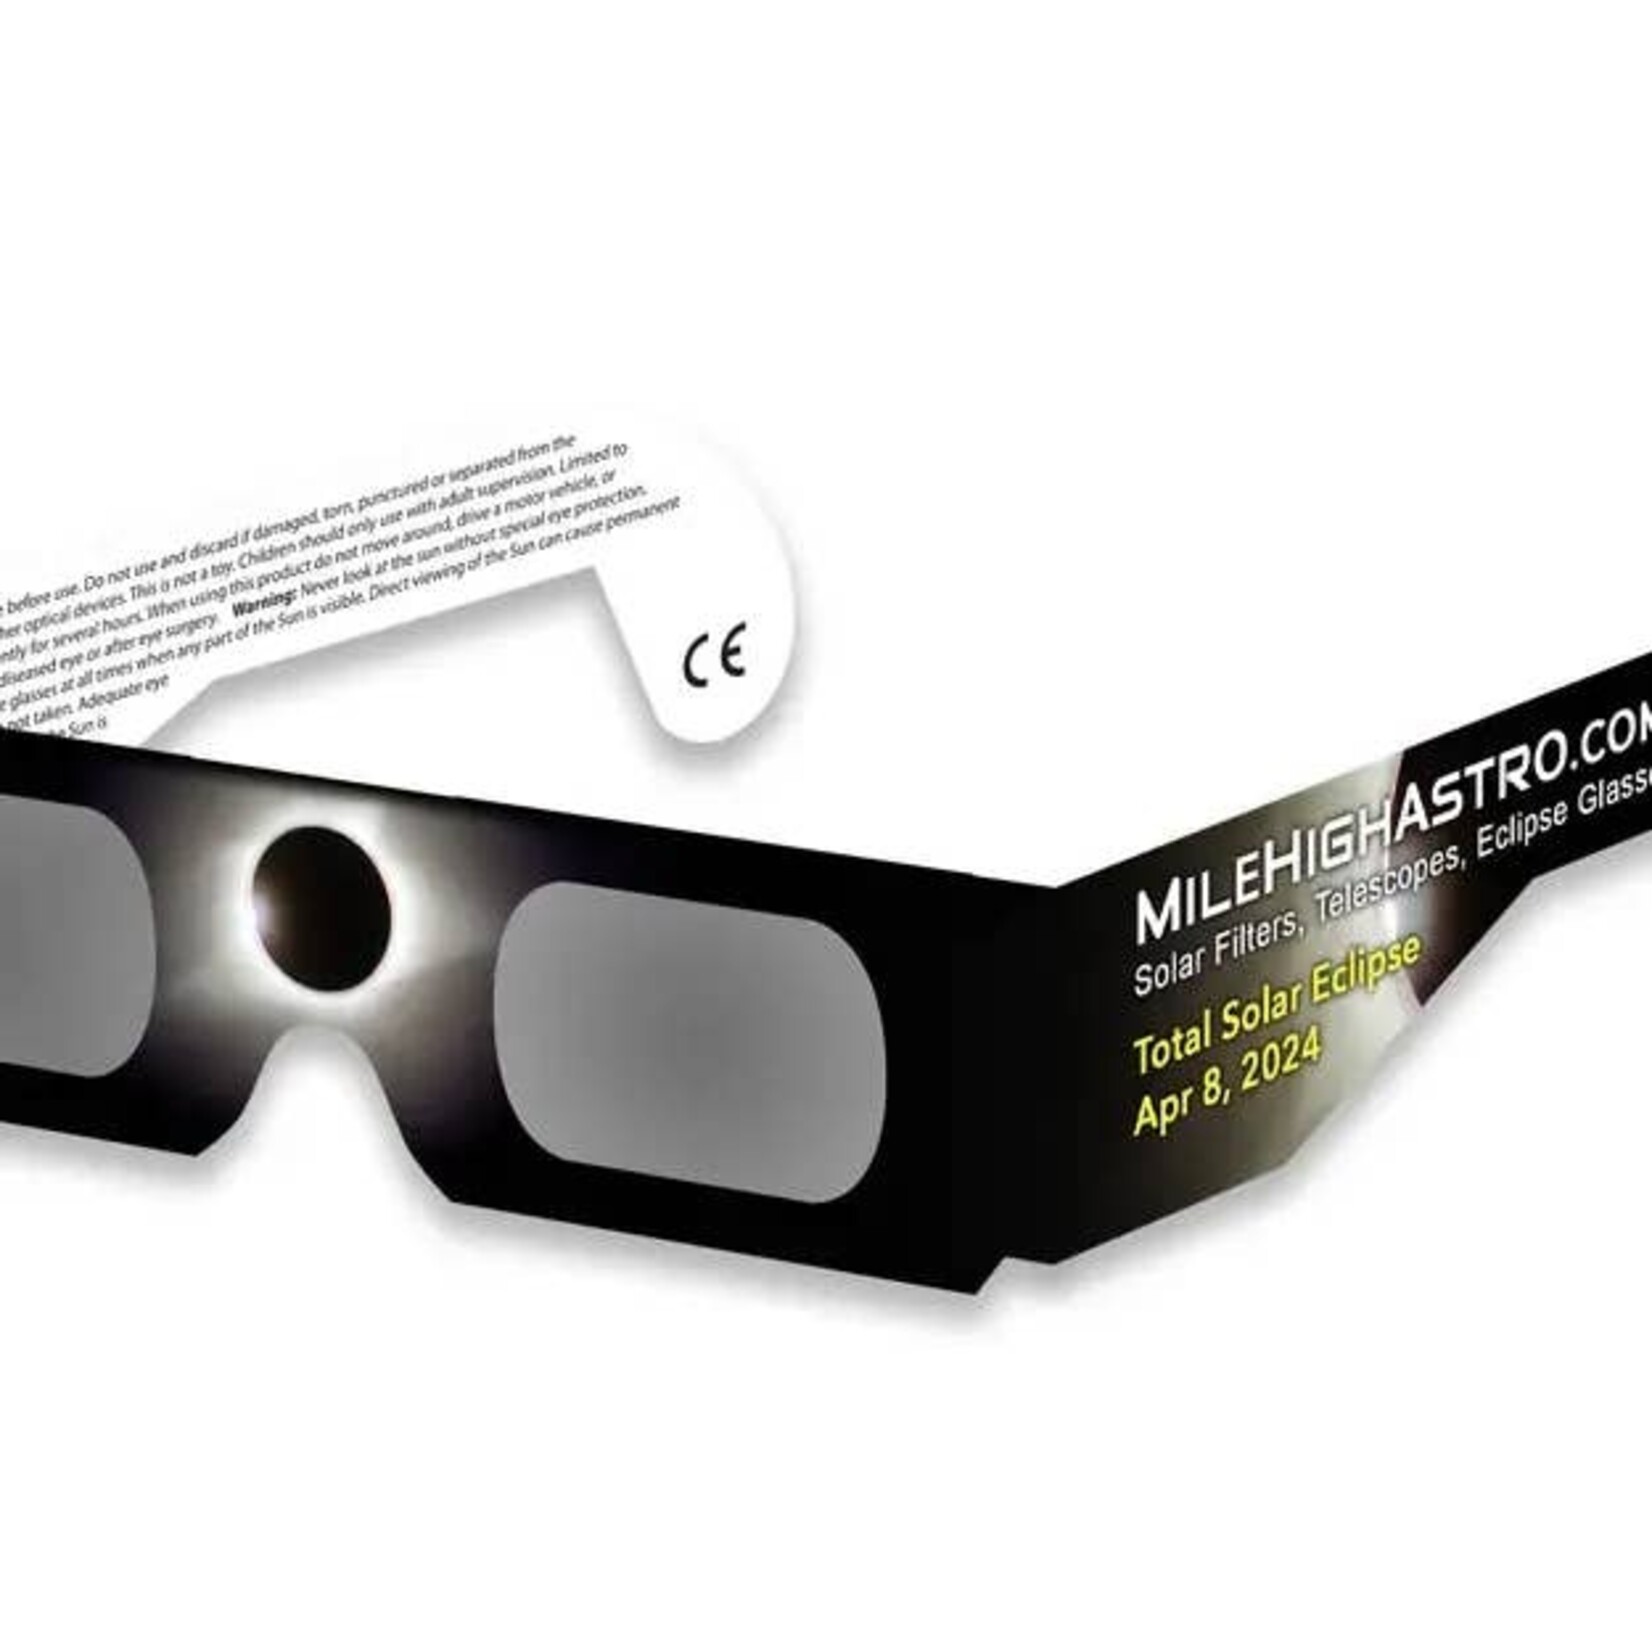 Mile High Astronomy Solar Eclipse Glasses - 5 Pack